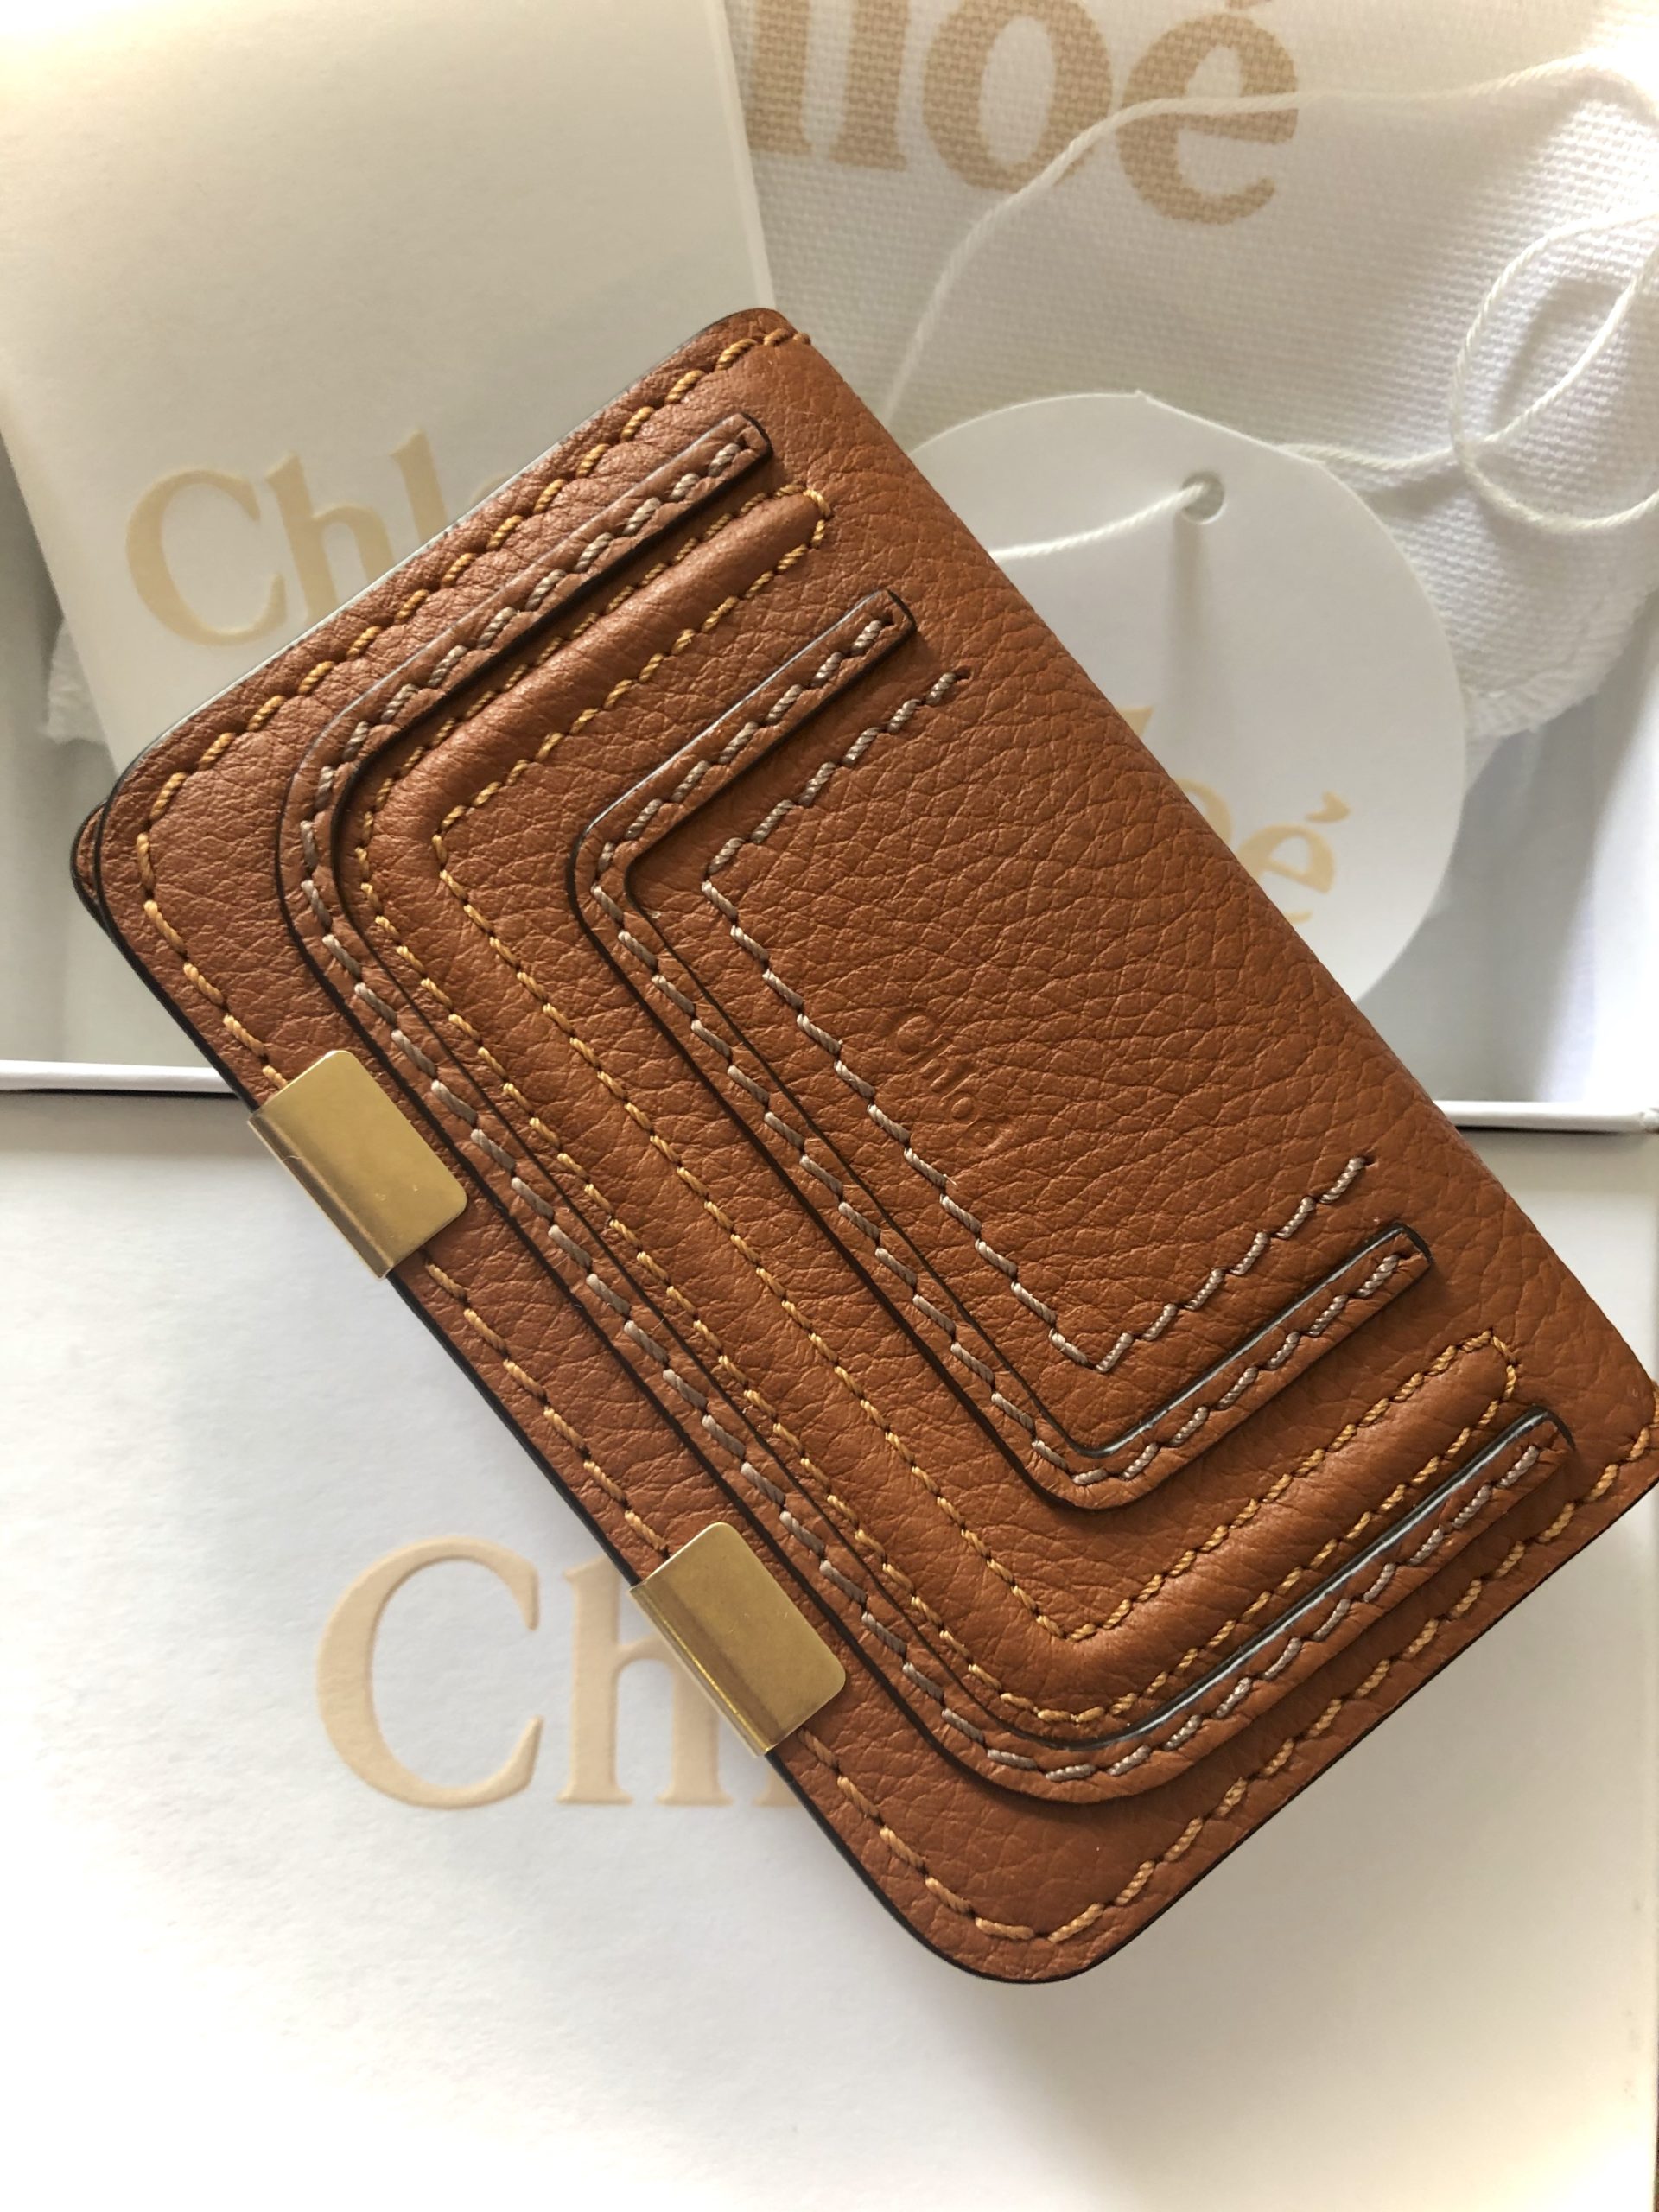 First Luxury piece – Chloé Marcie Wallet review